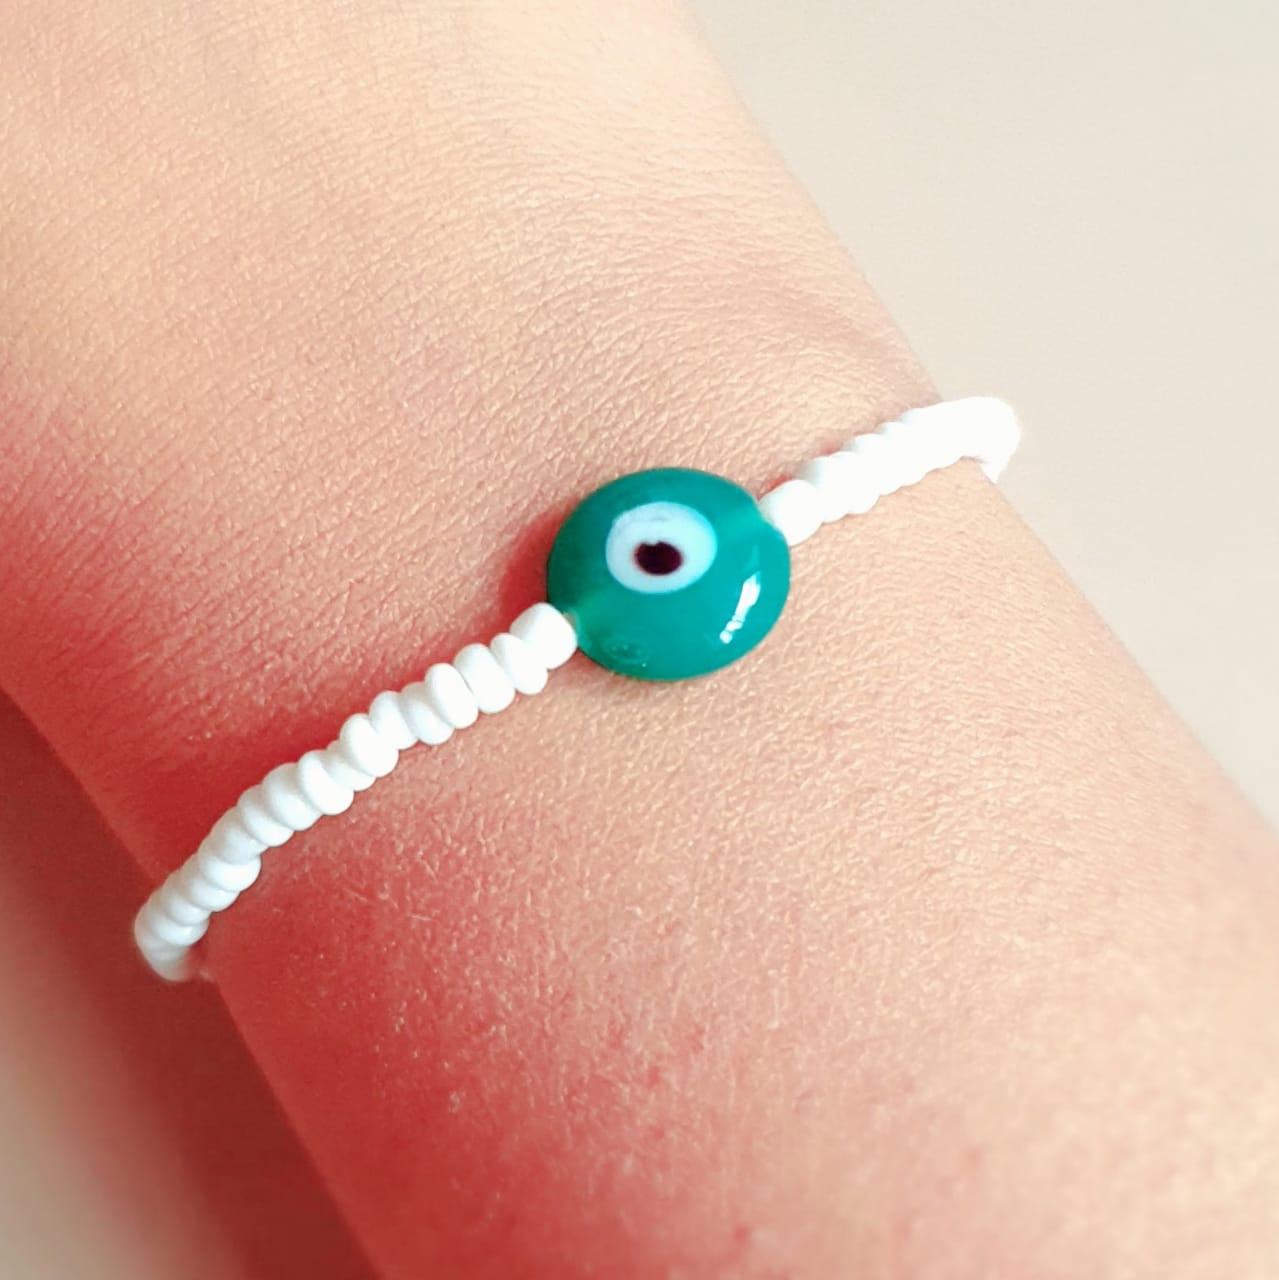 ATM Evil Eye Bracelet, Flat Turquoise Evil Eye with White Beads for Good Luck and Prosperity, Nazariya, Nazar Battu , Flexi Cord (1 Piece) (Turquoise Evil Eye - Happiness and Protection)